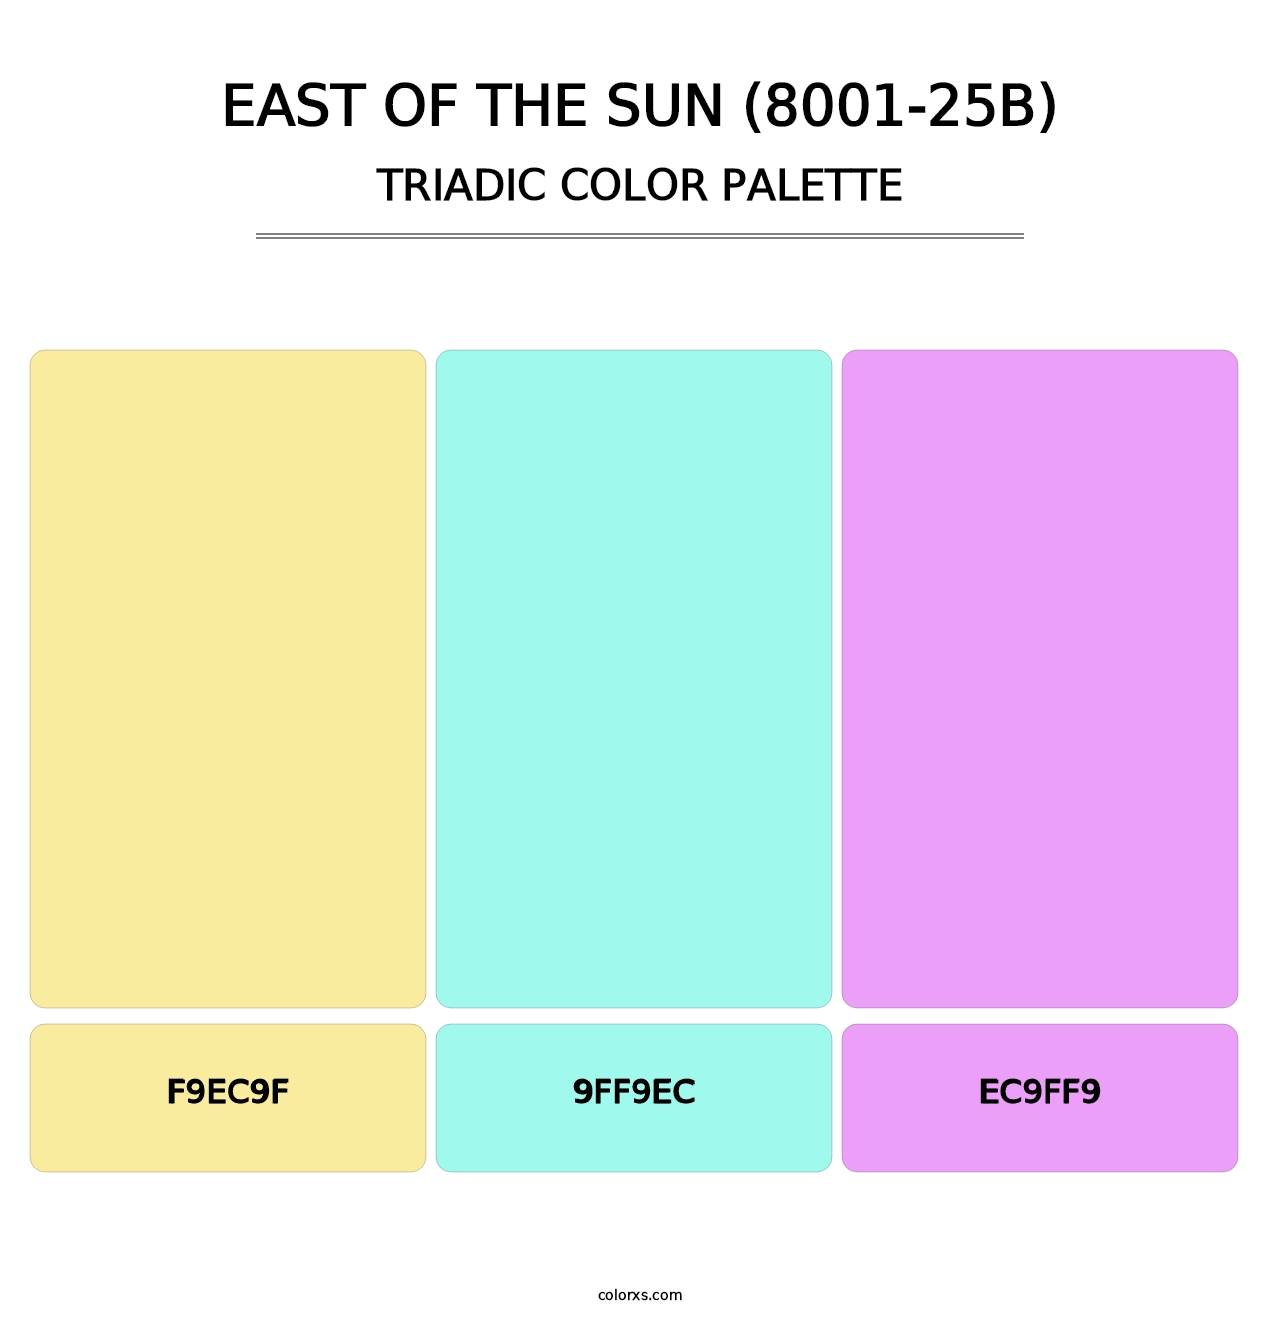 East of the Sun (8001-25B) - Triadic Color Palette